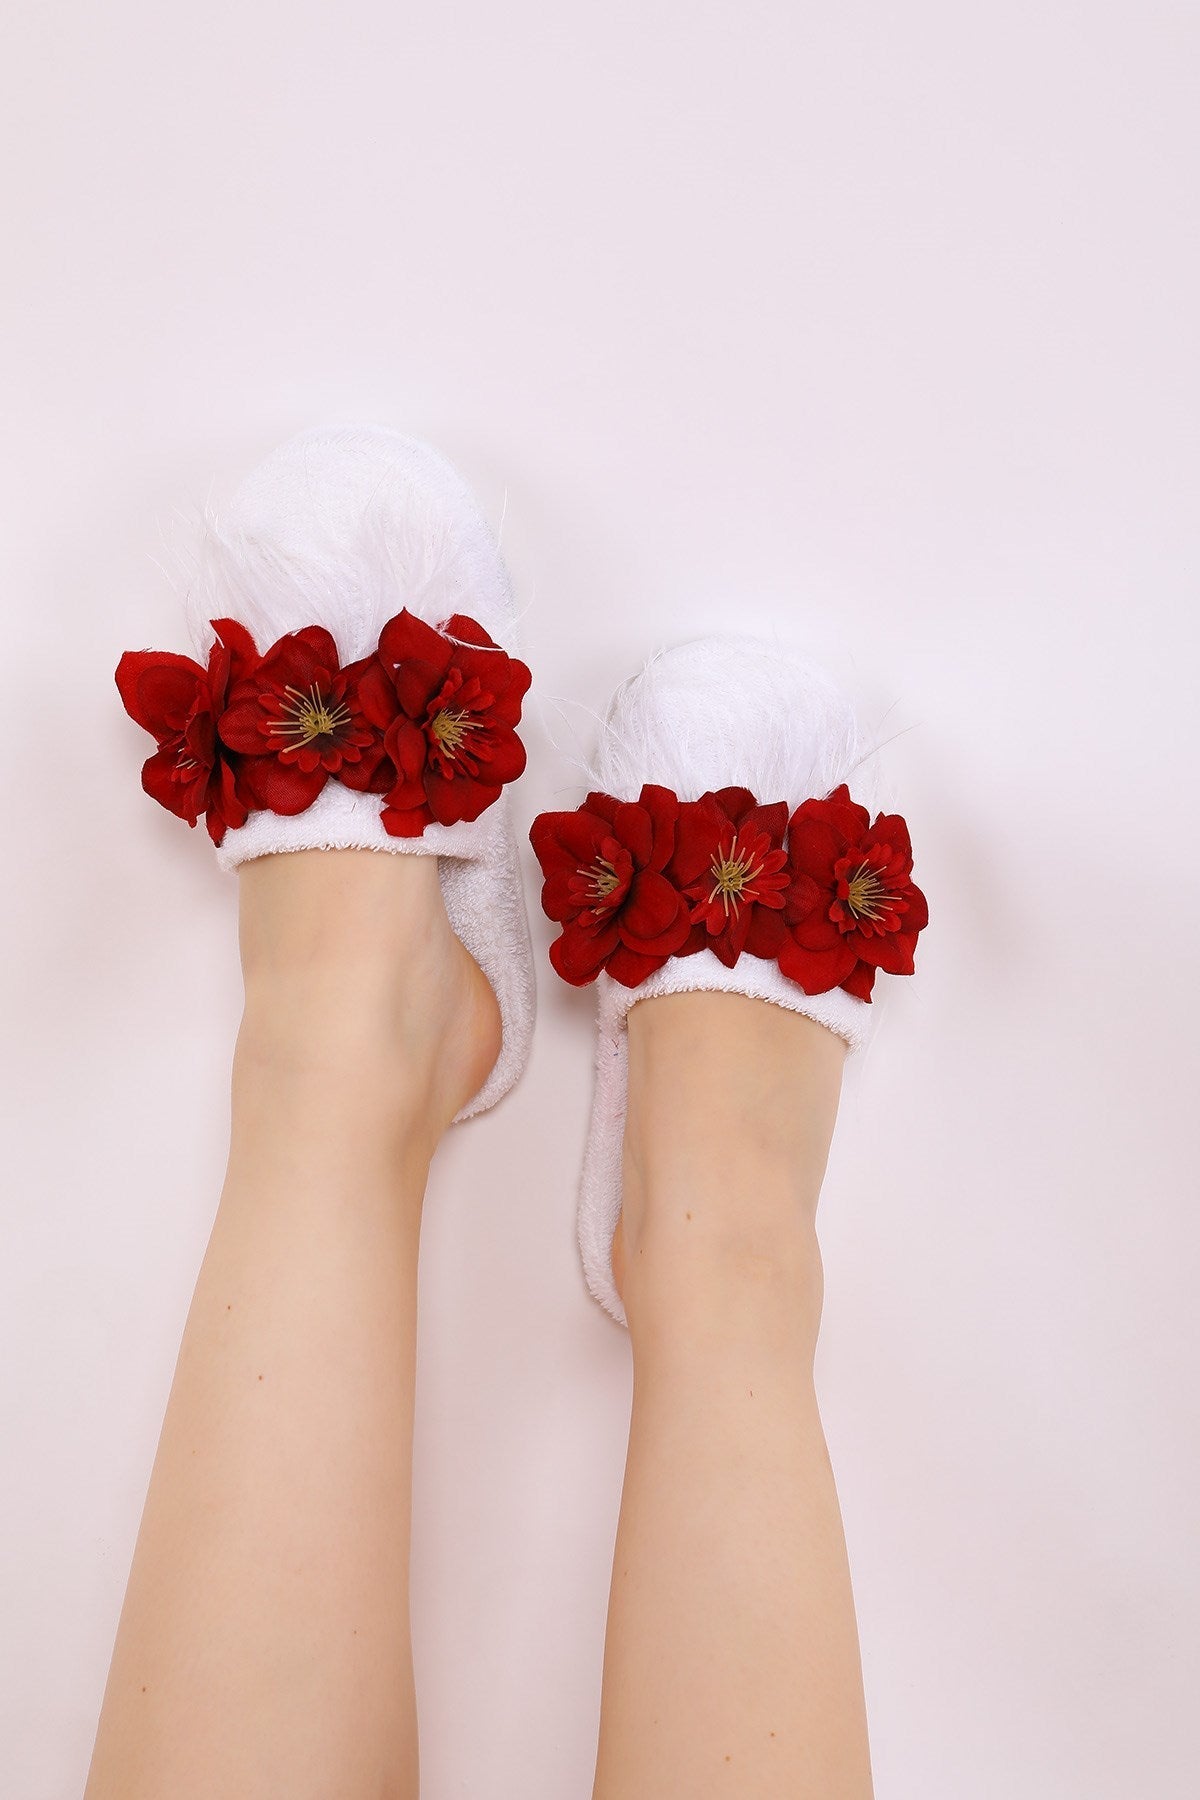 Lht 17056 Red Floral Pattern Feathered Maternity Slippers